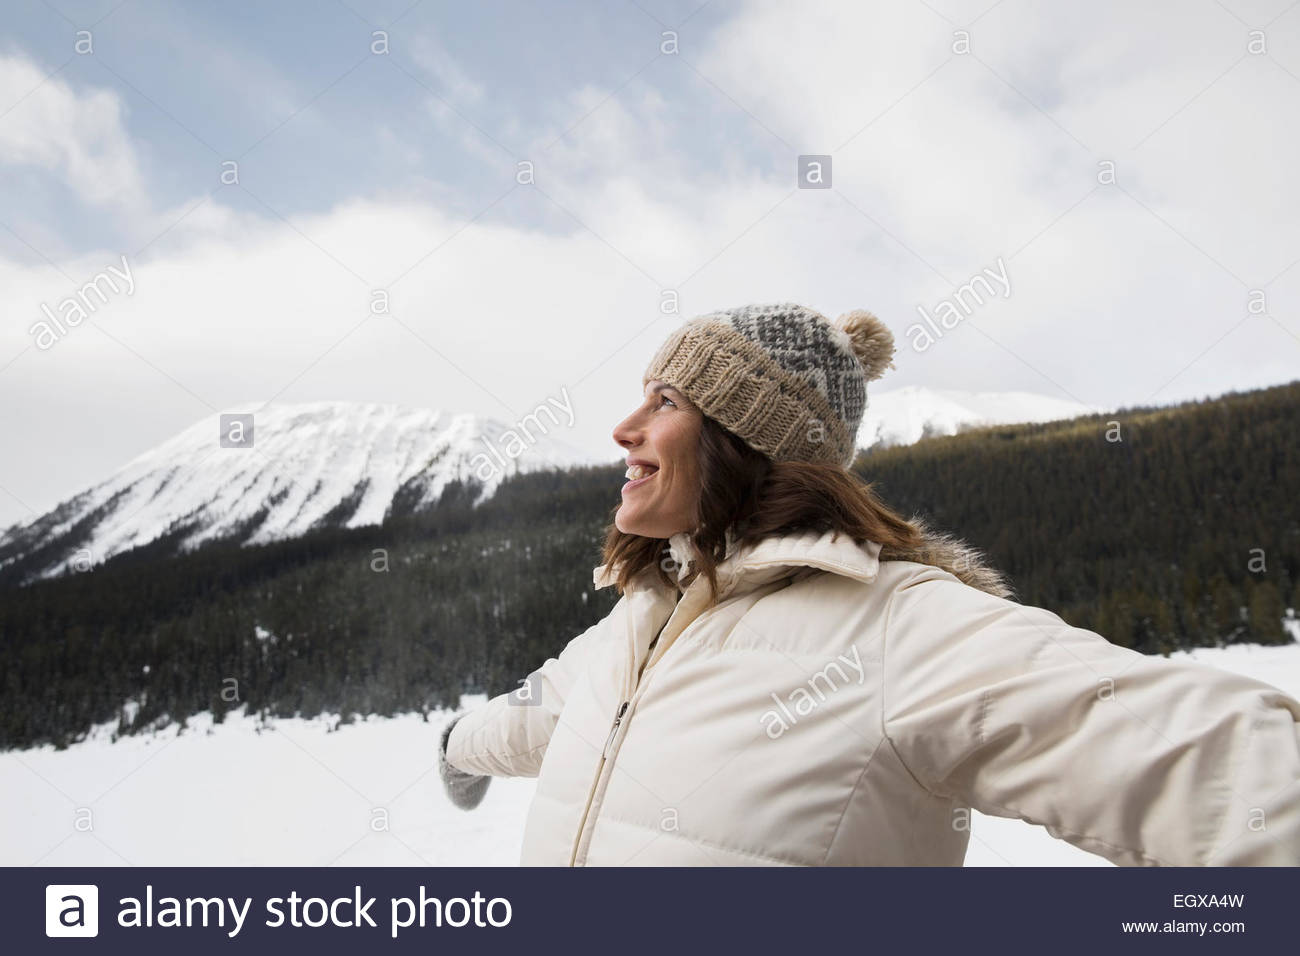 Smiling woman with arms outstretched in snowy field Stock Photo